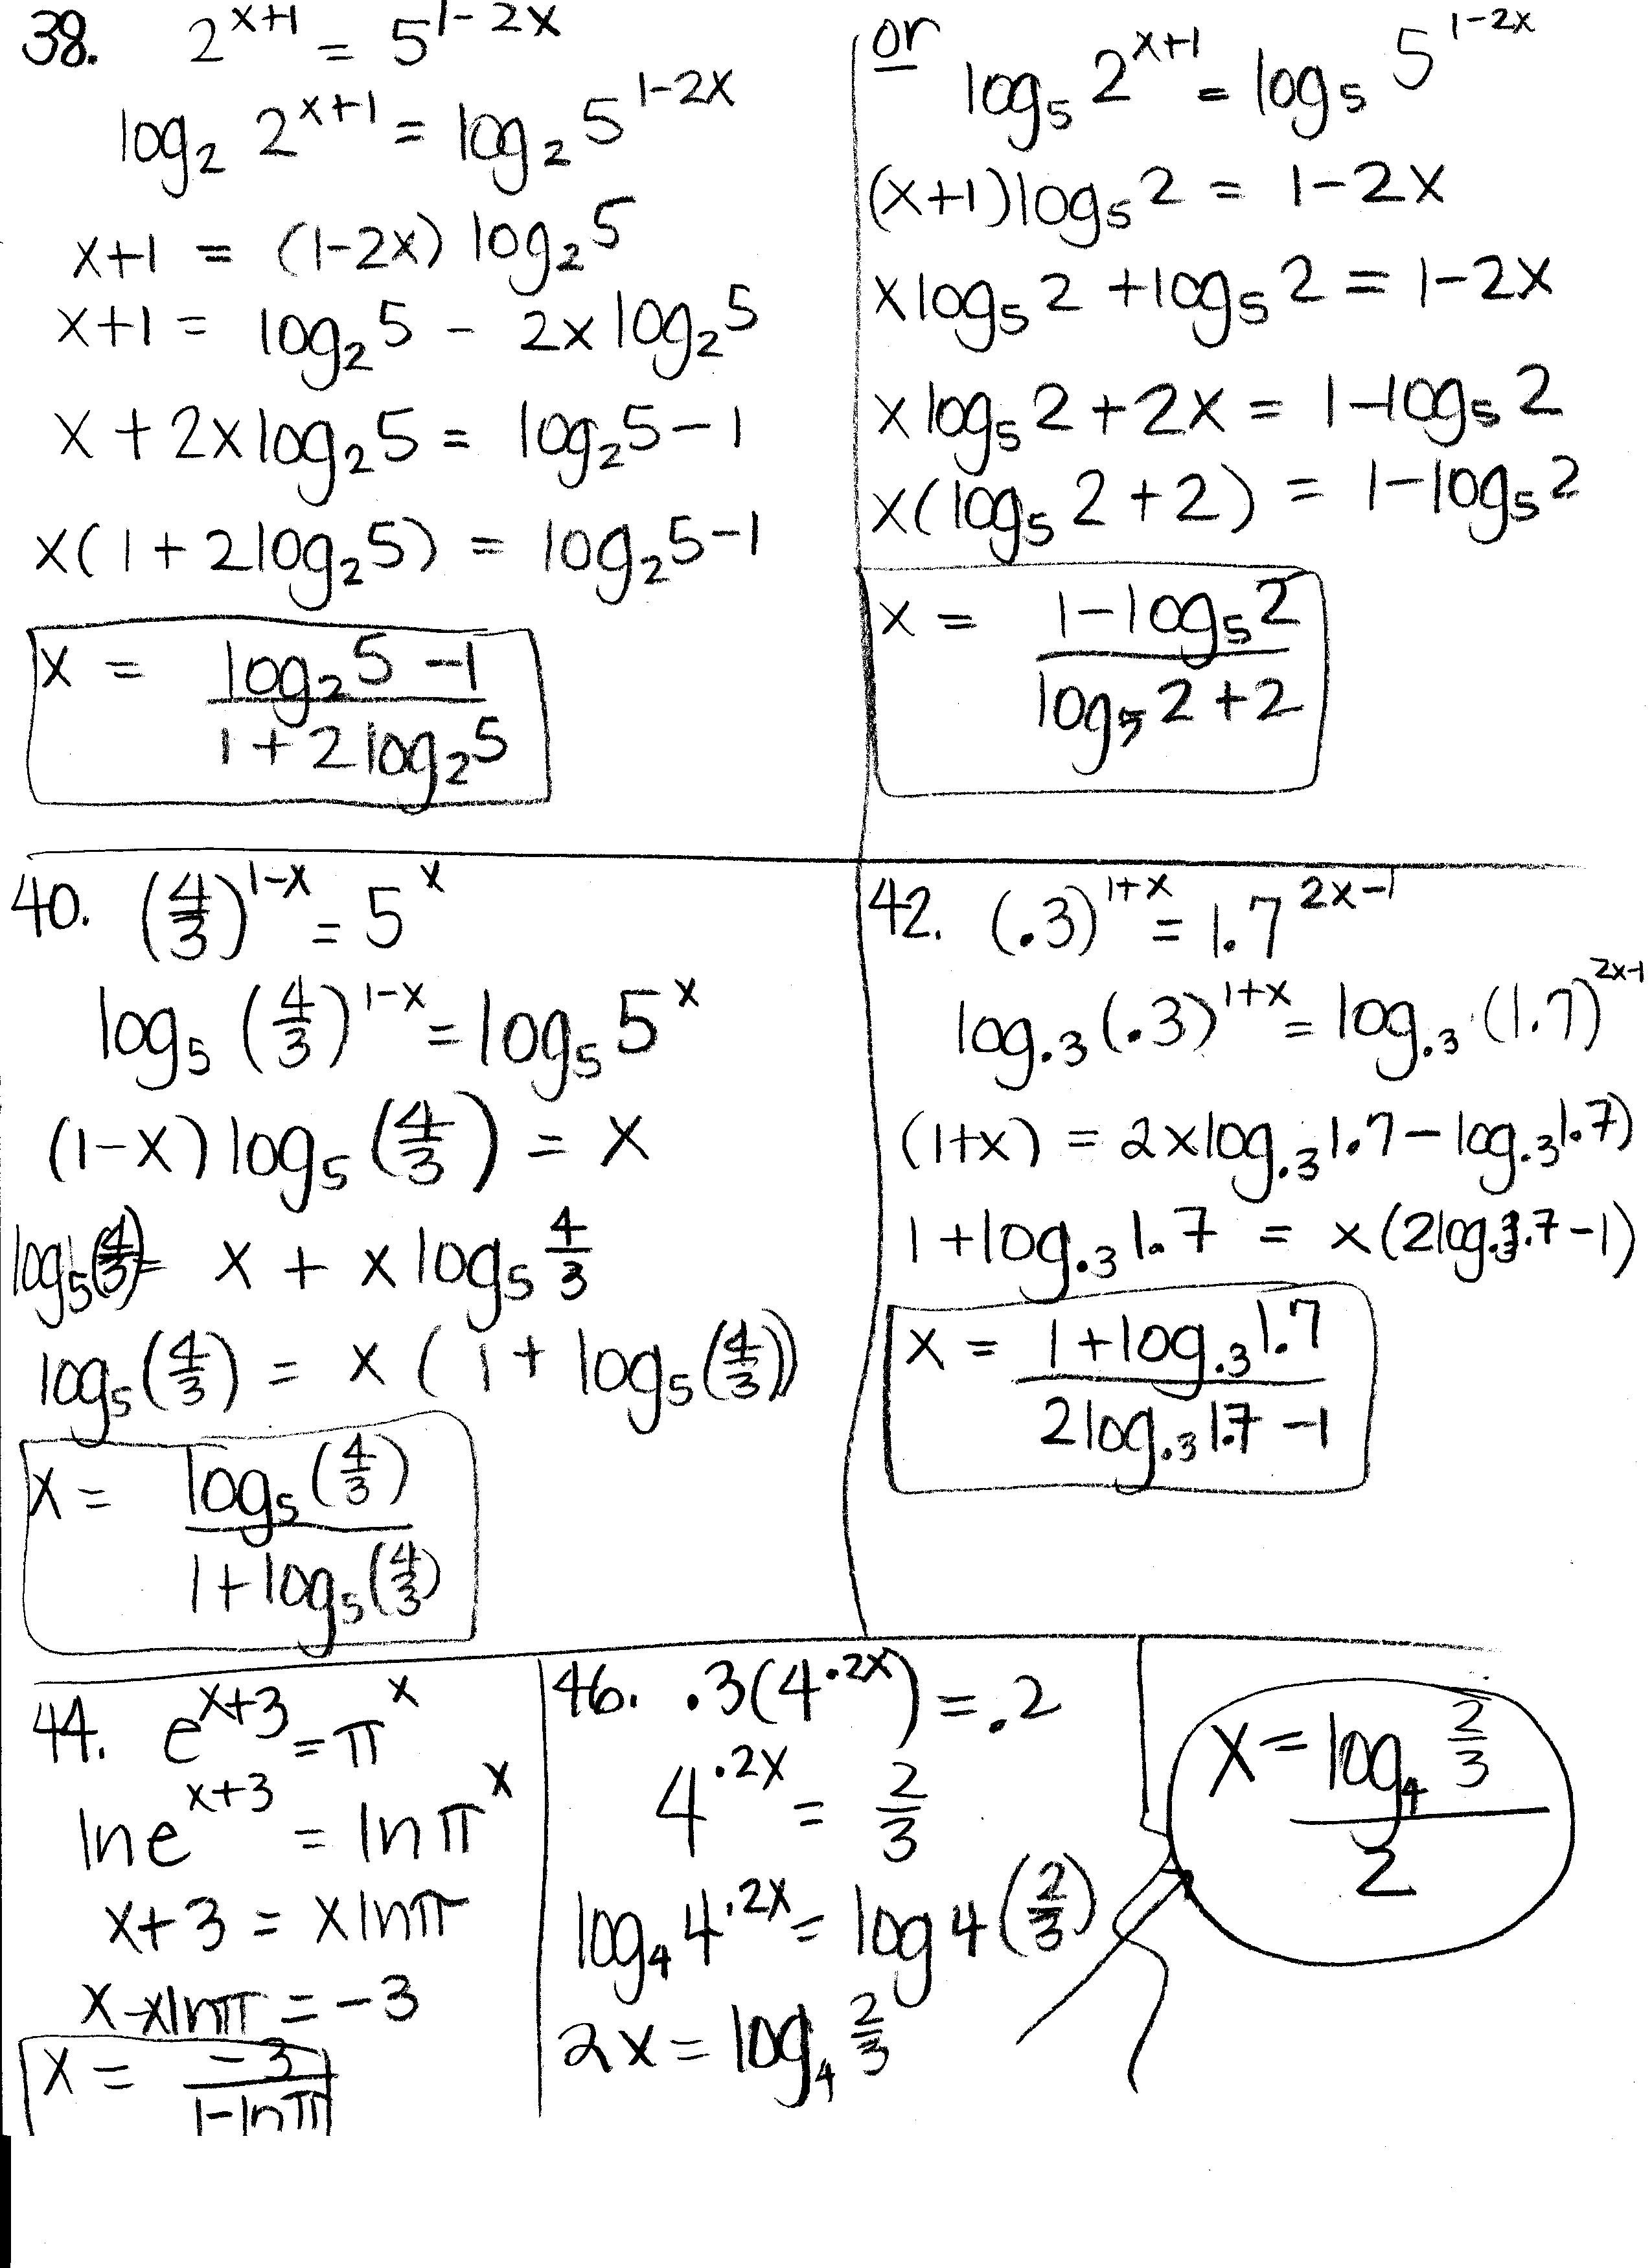 Homework Solving Exponential And Logarithmic Equations  Hetzner For Solving Exponential And Logarithmic Equations Worksheet